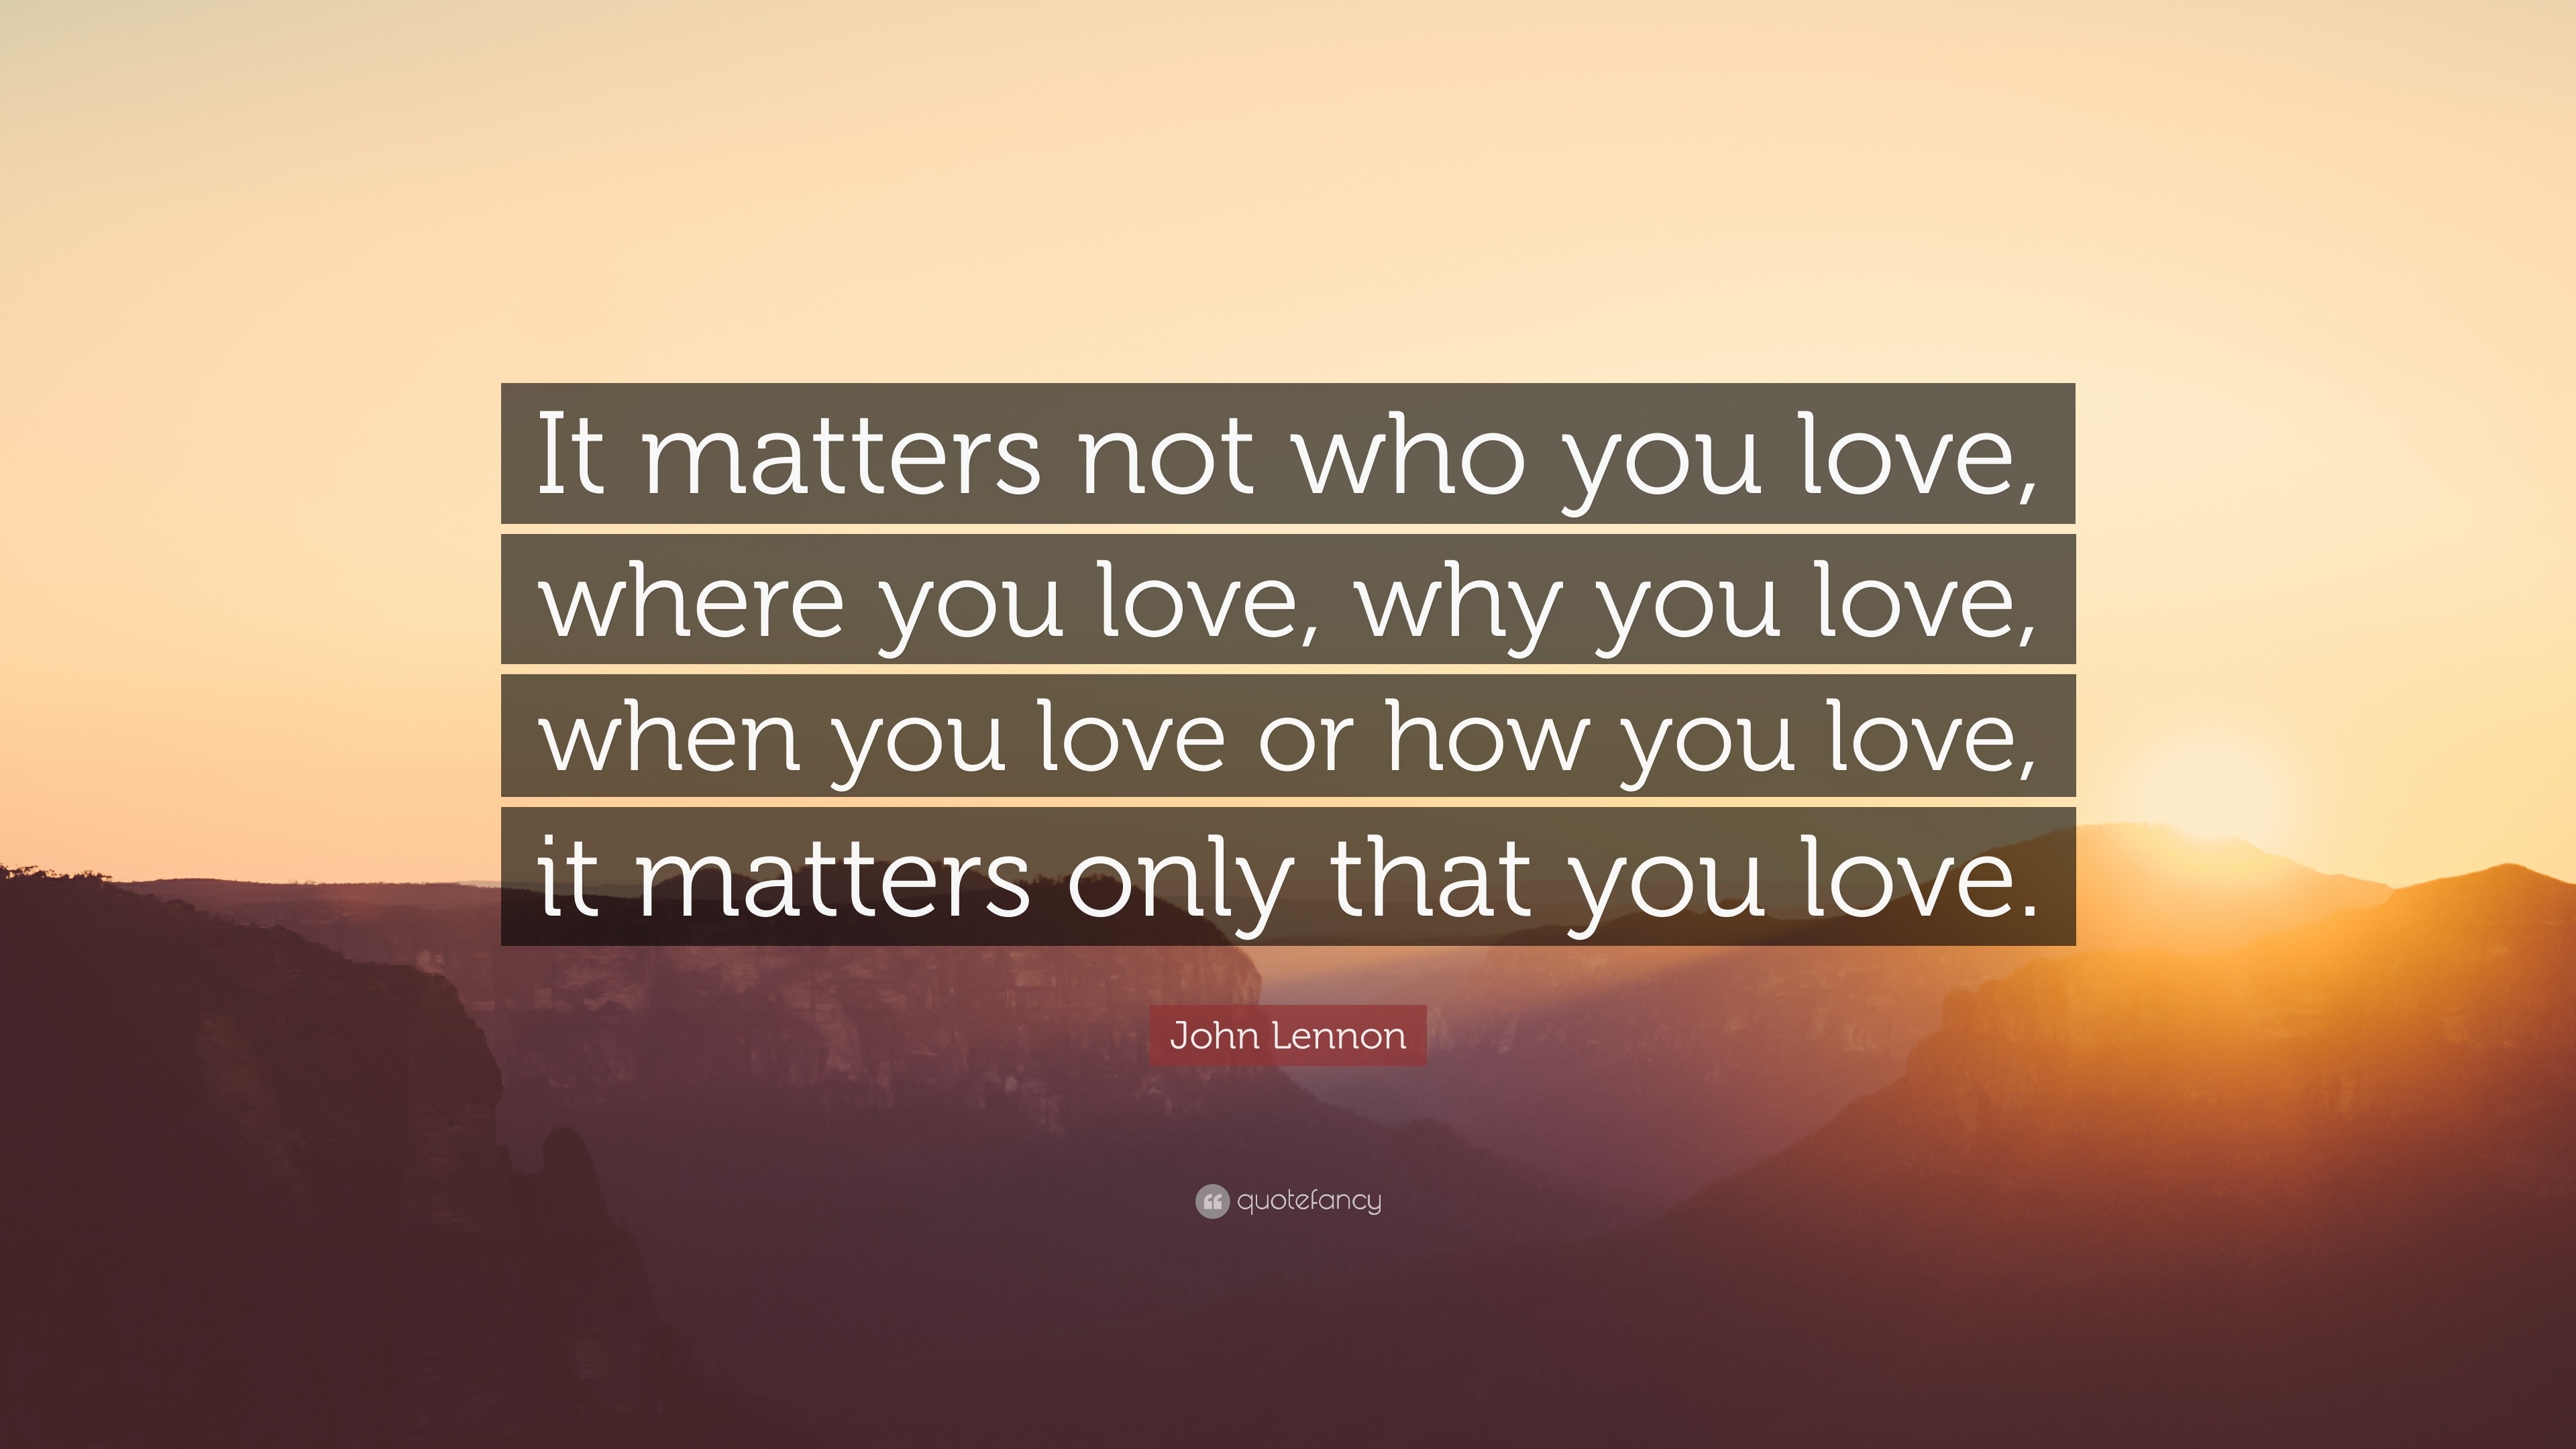 John Lennon Quote: “It matters not who you love, where you love, why ...